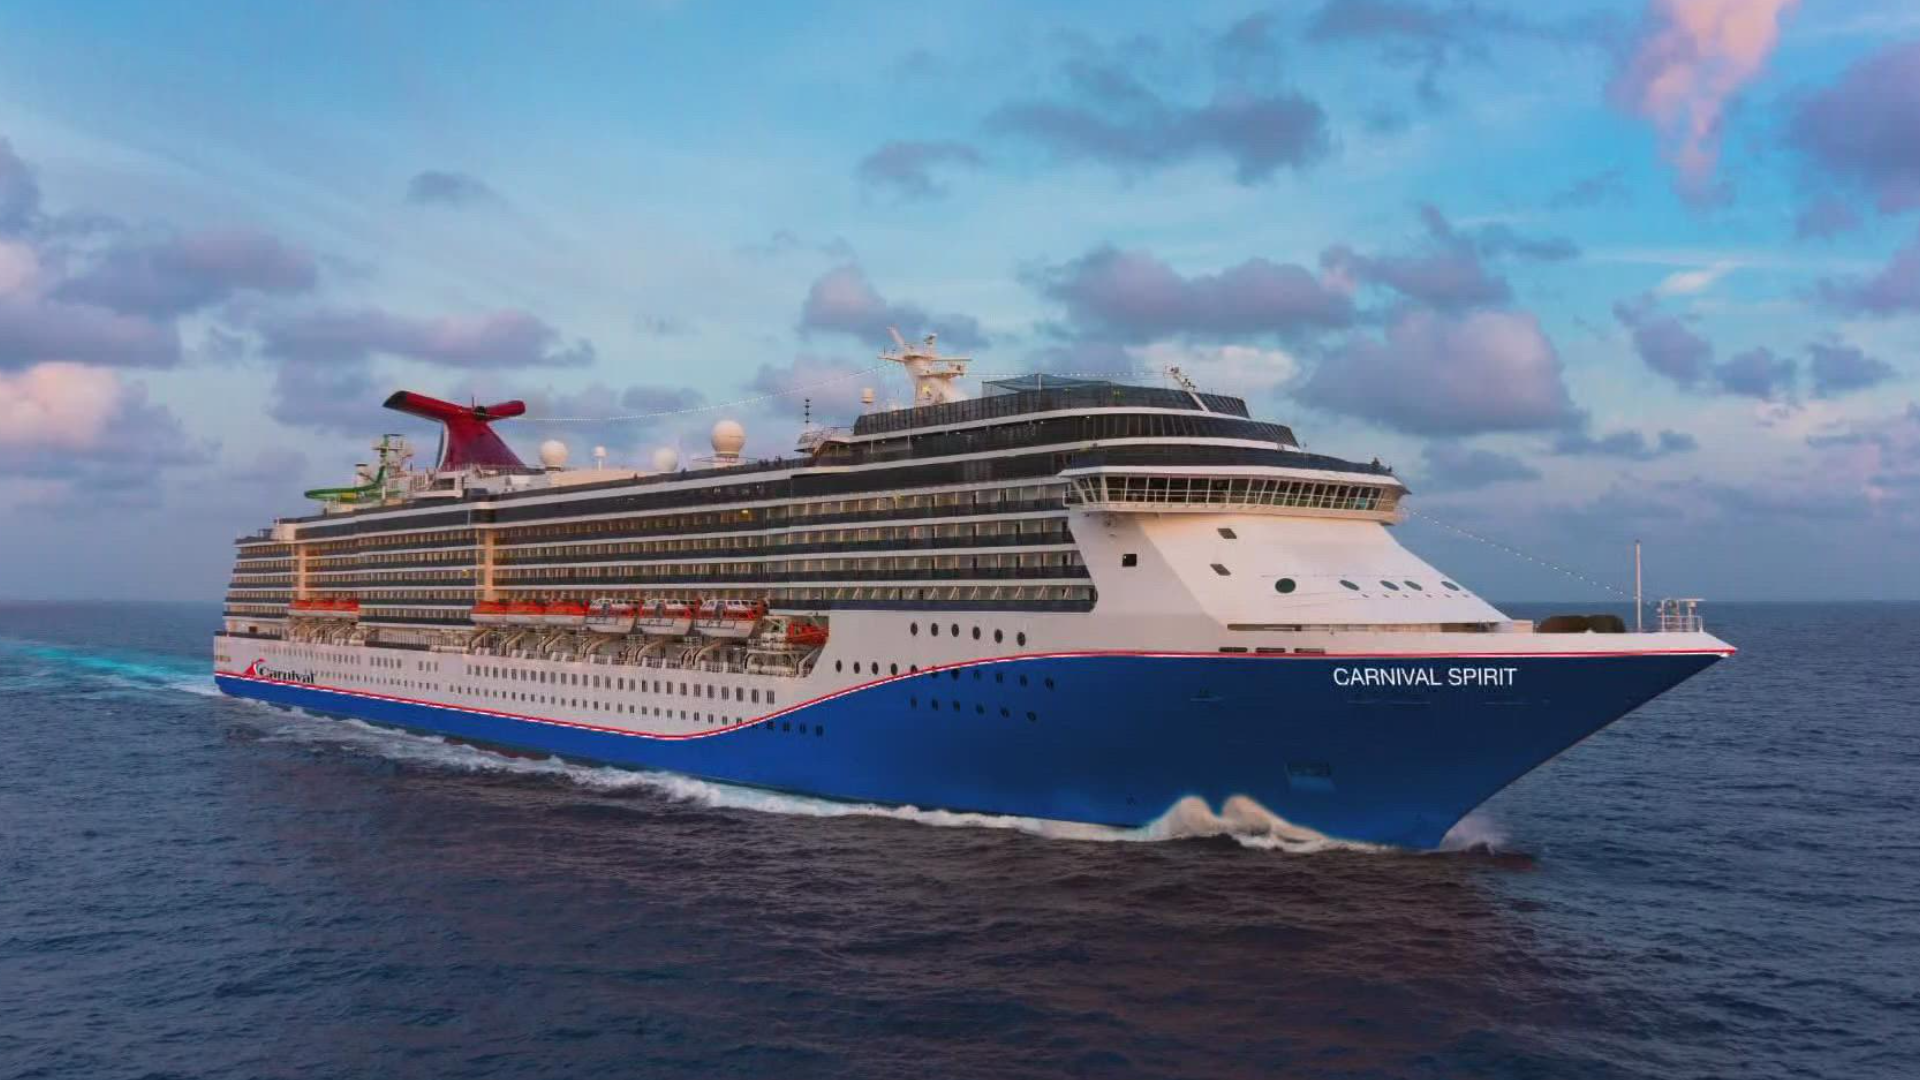 According to cruise industry insider and reporter Doug Parker, Carnival Spirit will give people more amenities and more space than the Ecstasy.